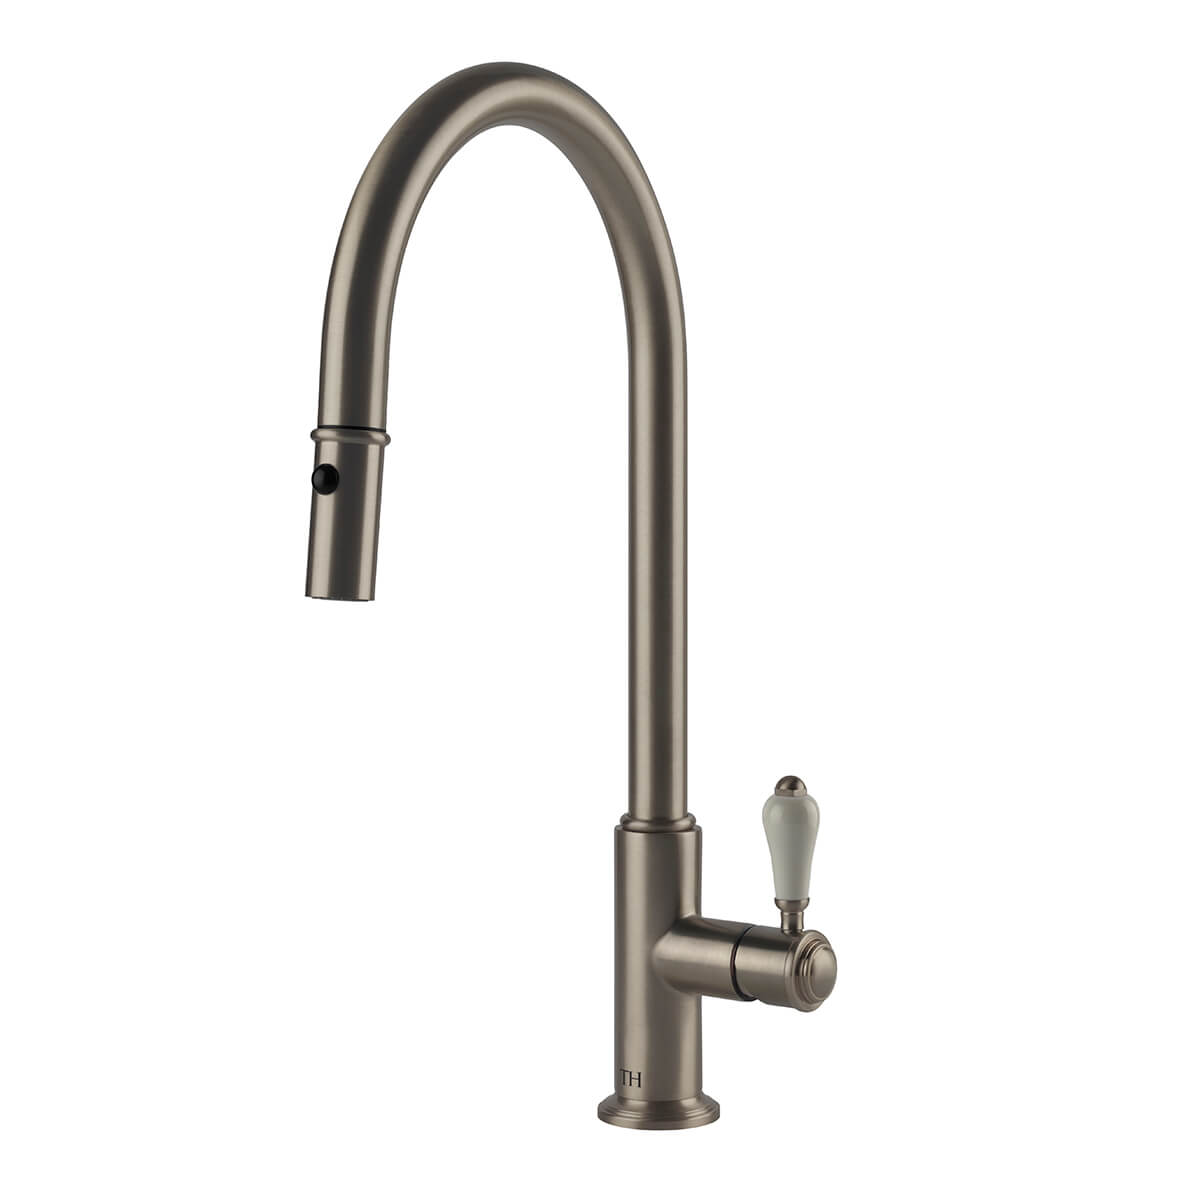 TURNER HASTINGS LUDLOW PULL OUT SINK MIXER 418MM BRUSHED NICKEL (CERAMIC HANDLE)